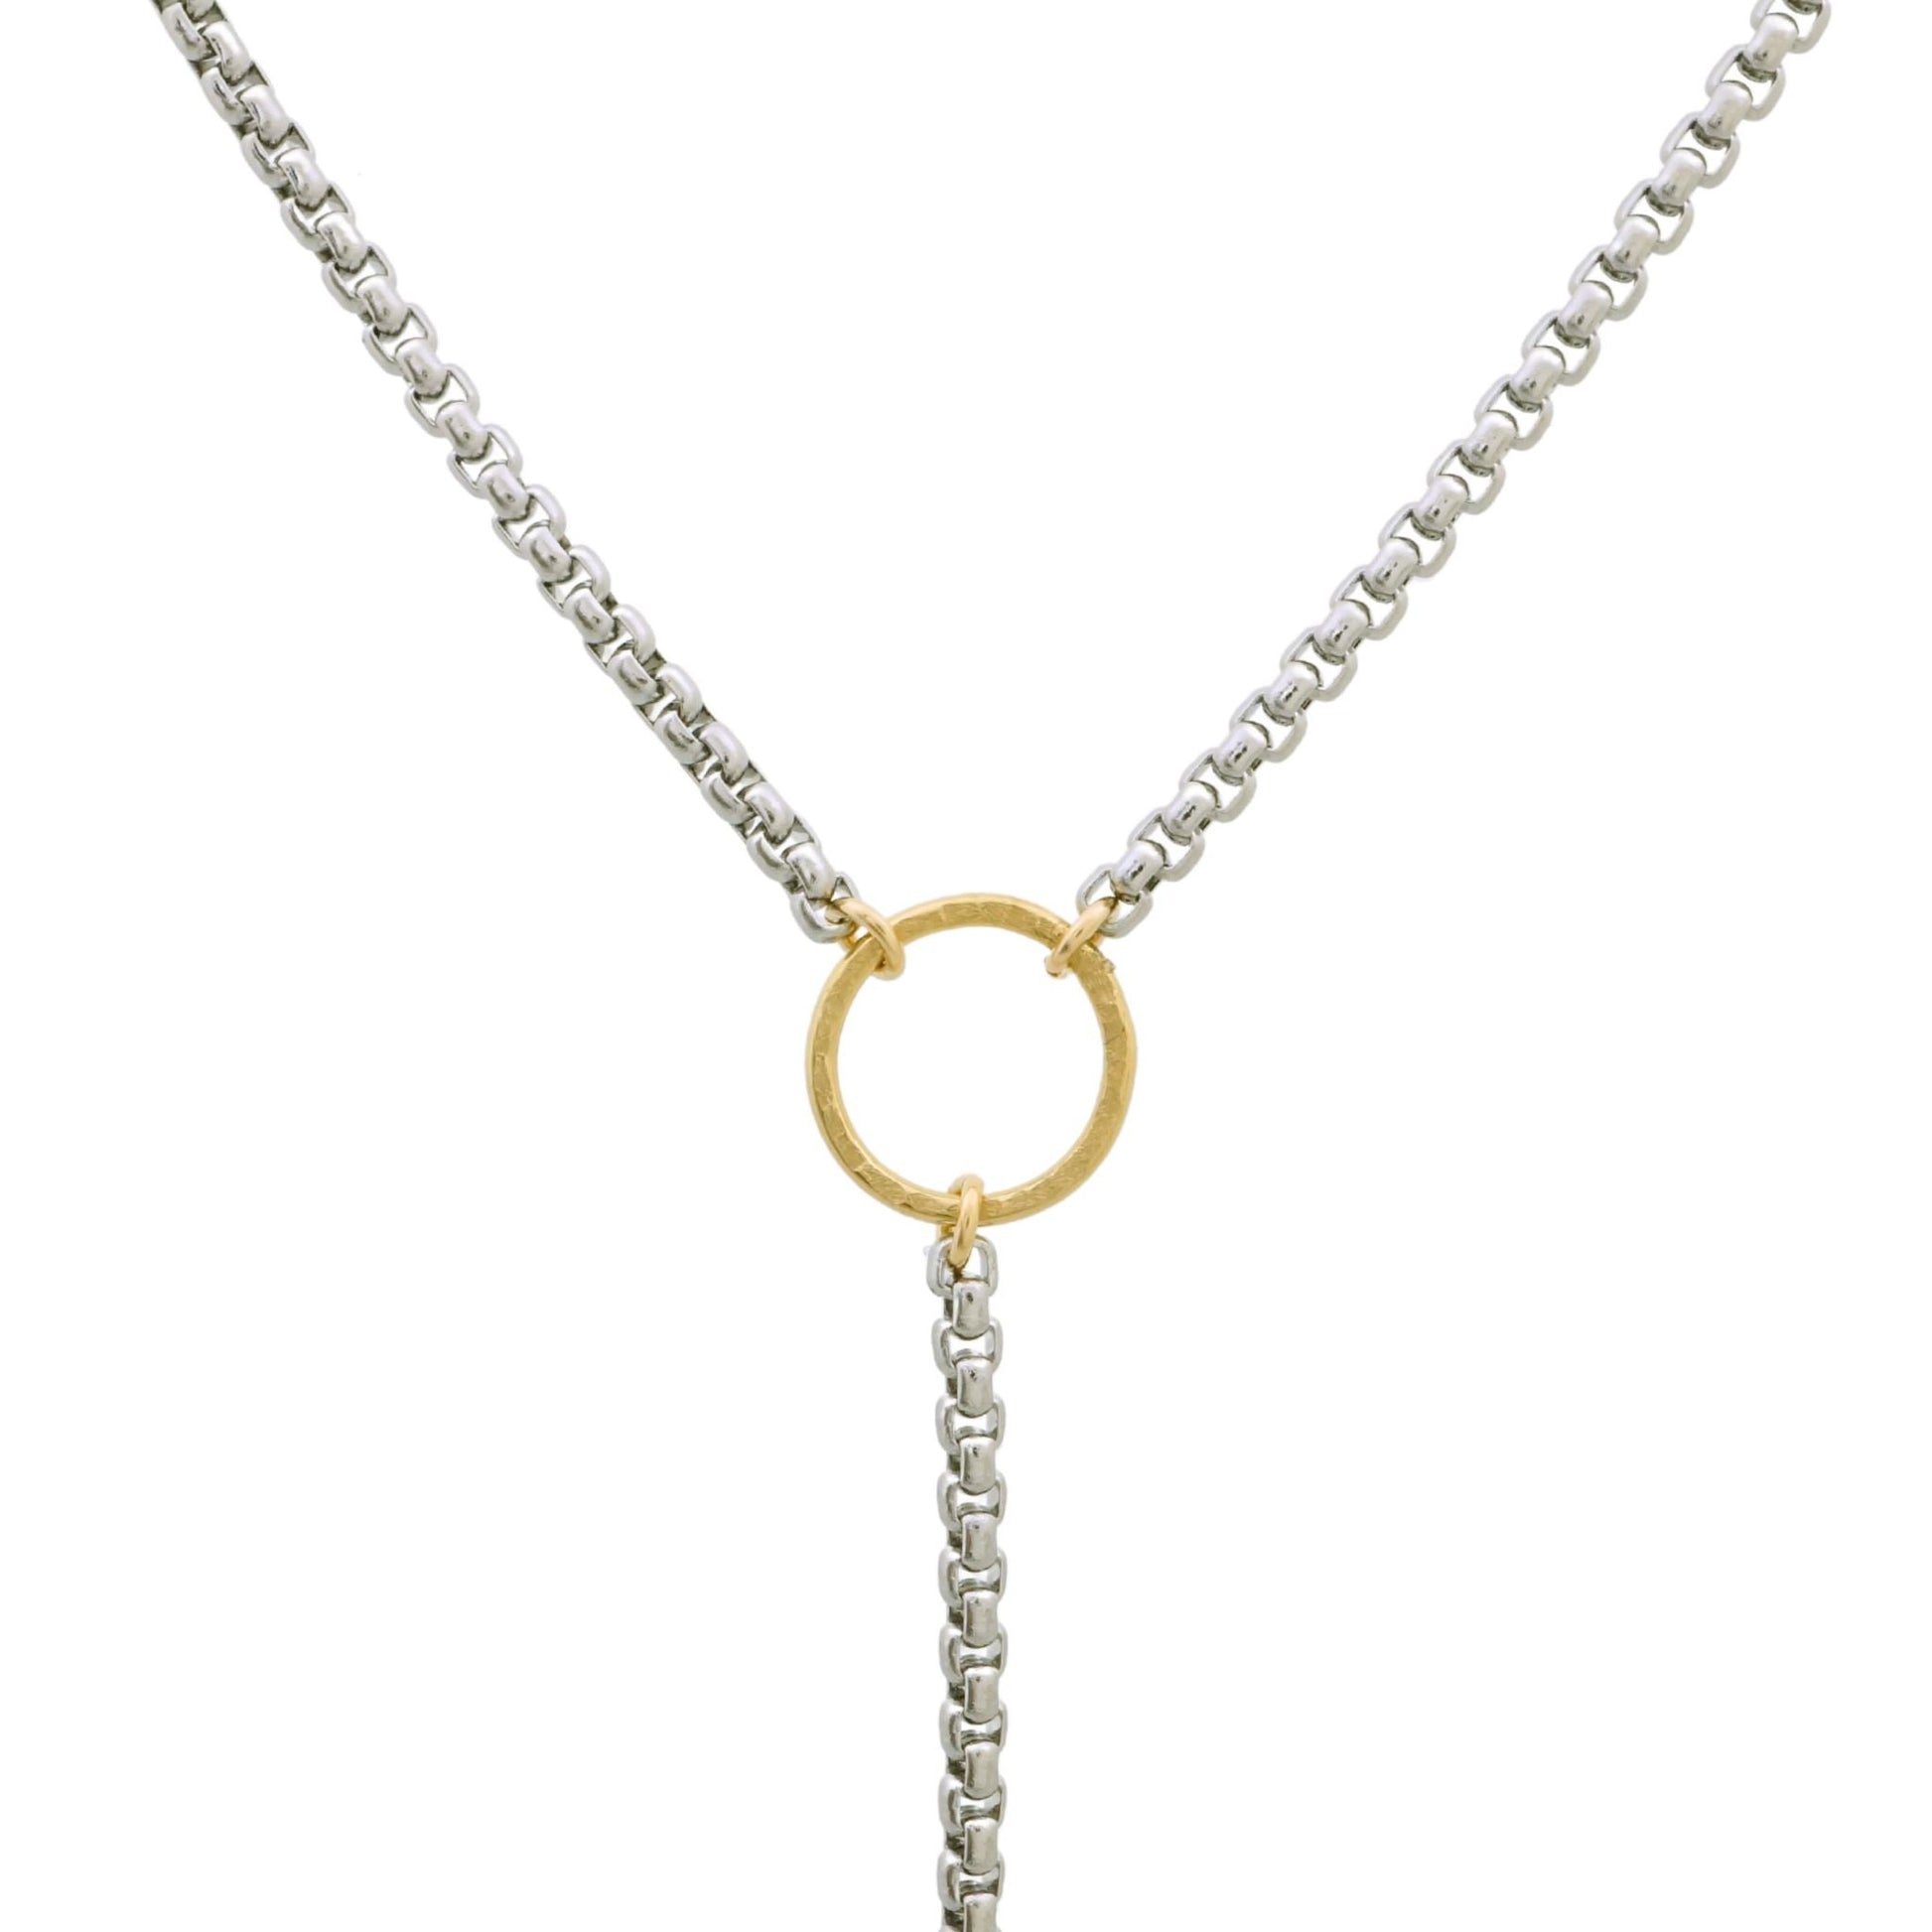 Necklace - Lariat - Mixed Metals Stainless Steel and Gold-filled - 2